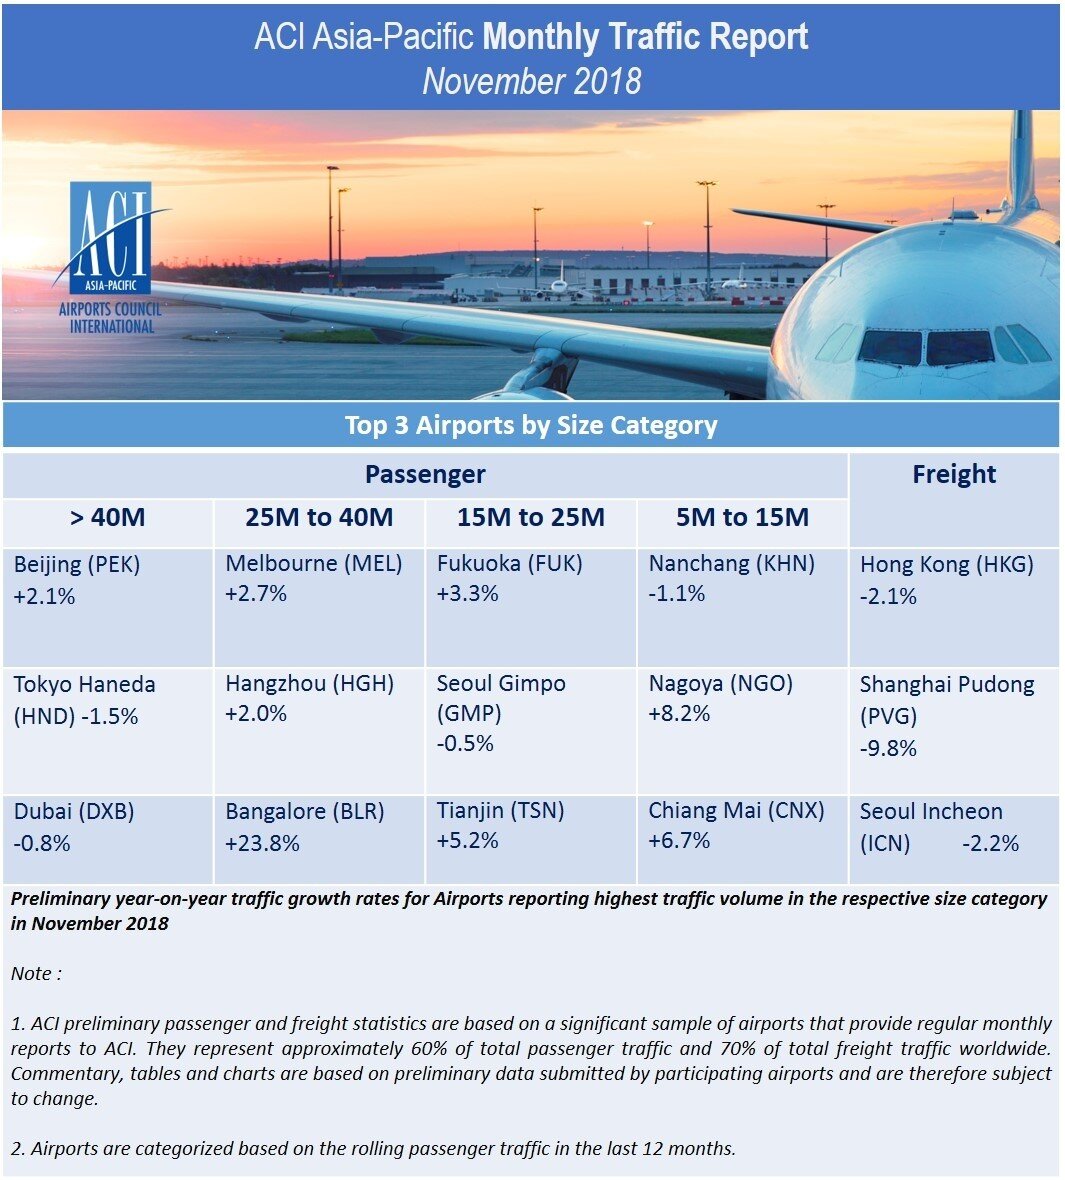 November 2018: Passengers up 3.8% in Asia-Pacific and 2.7% in Middle East